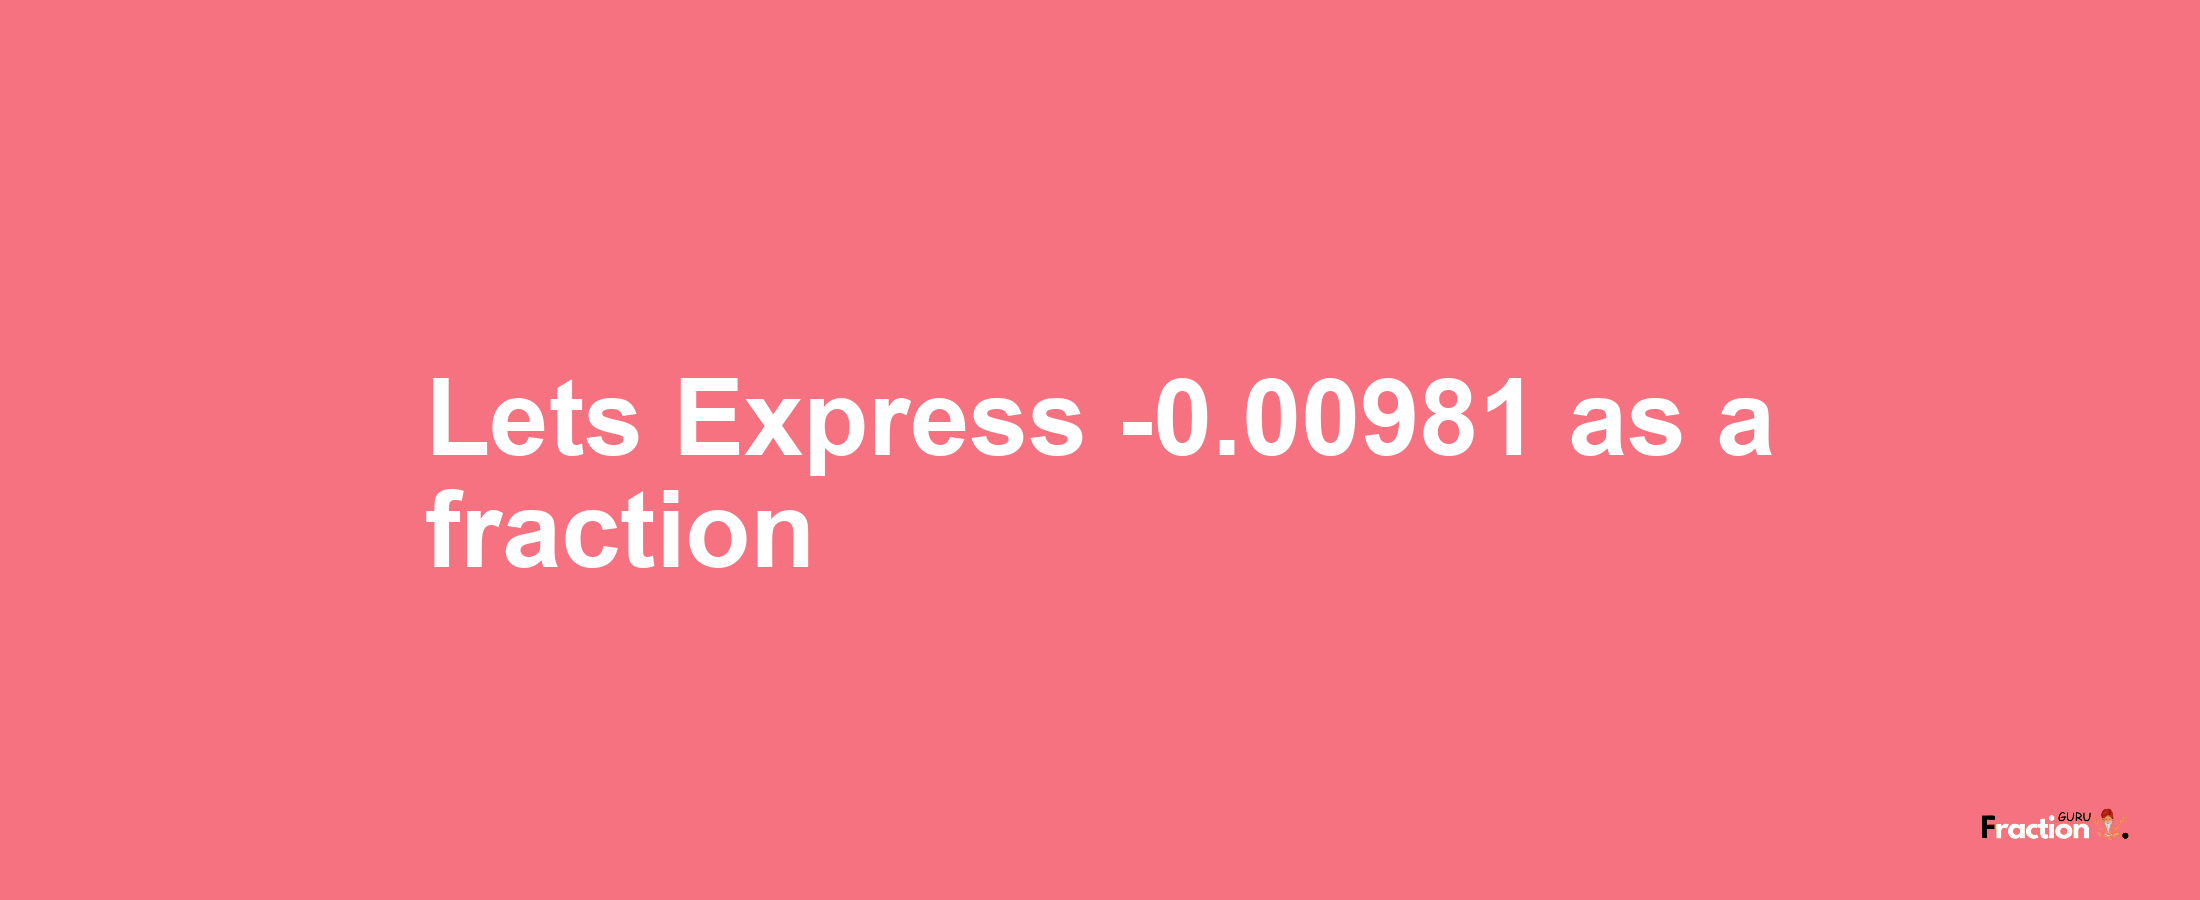 Lets Express -0.00981 as afraction